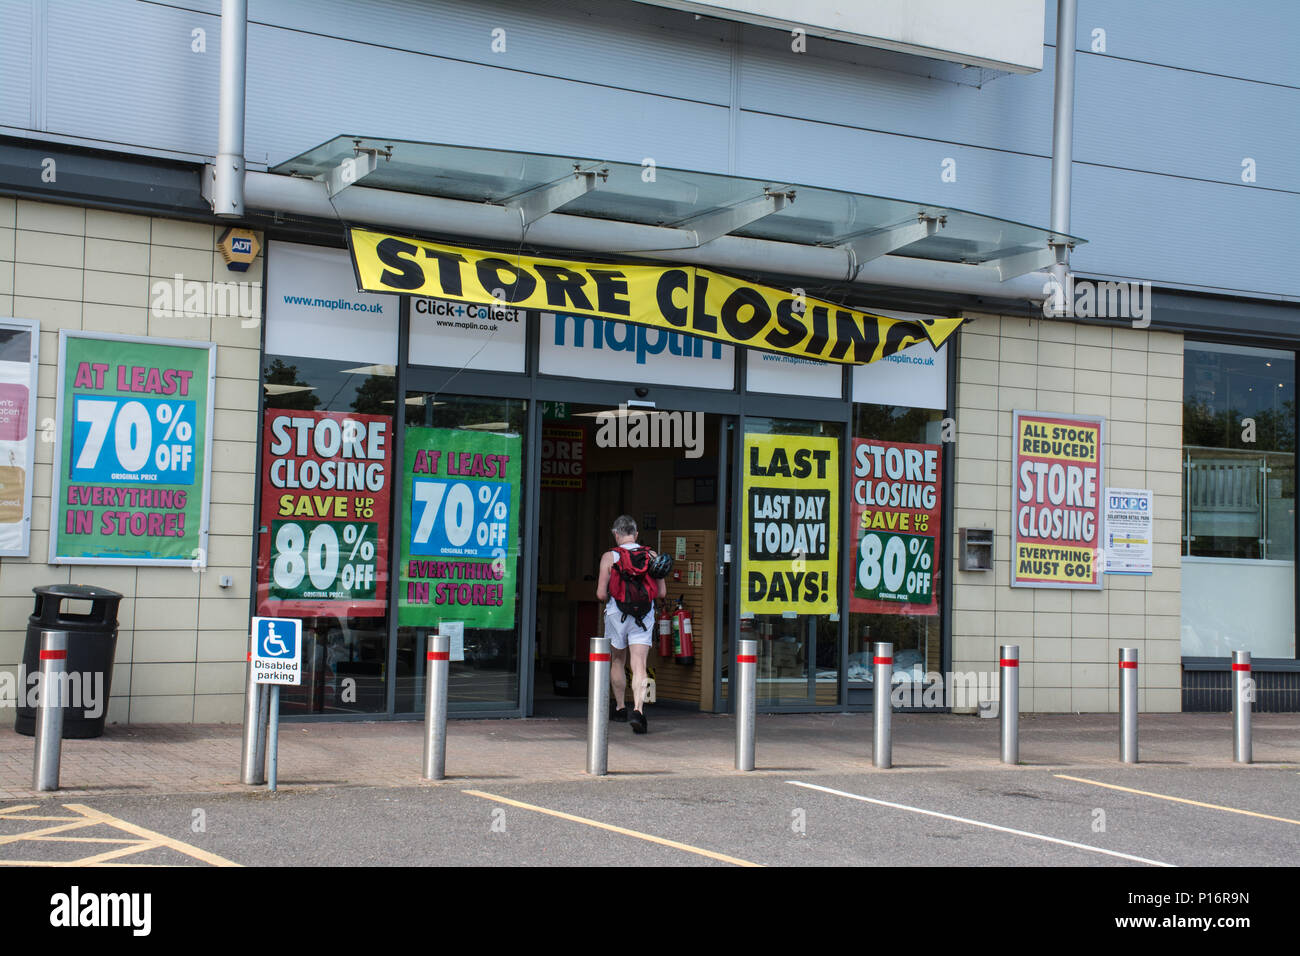 Farnborough, Hampshire, UK. 11th June, 2018. Today is the final day of trading for the electronics retailer, Maplins, in the town. The store is one of many retailers to be hard hit by changes in shopping habits in recent months. Stock Photo